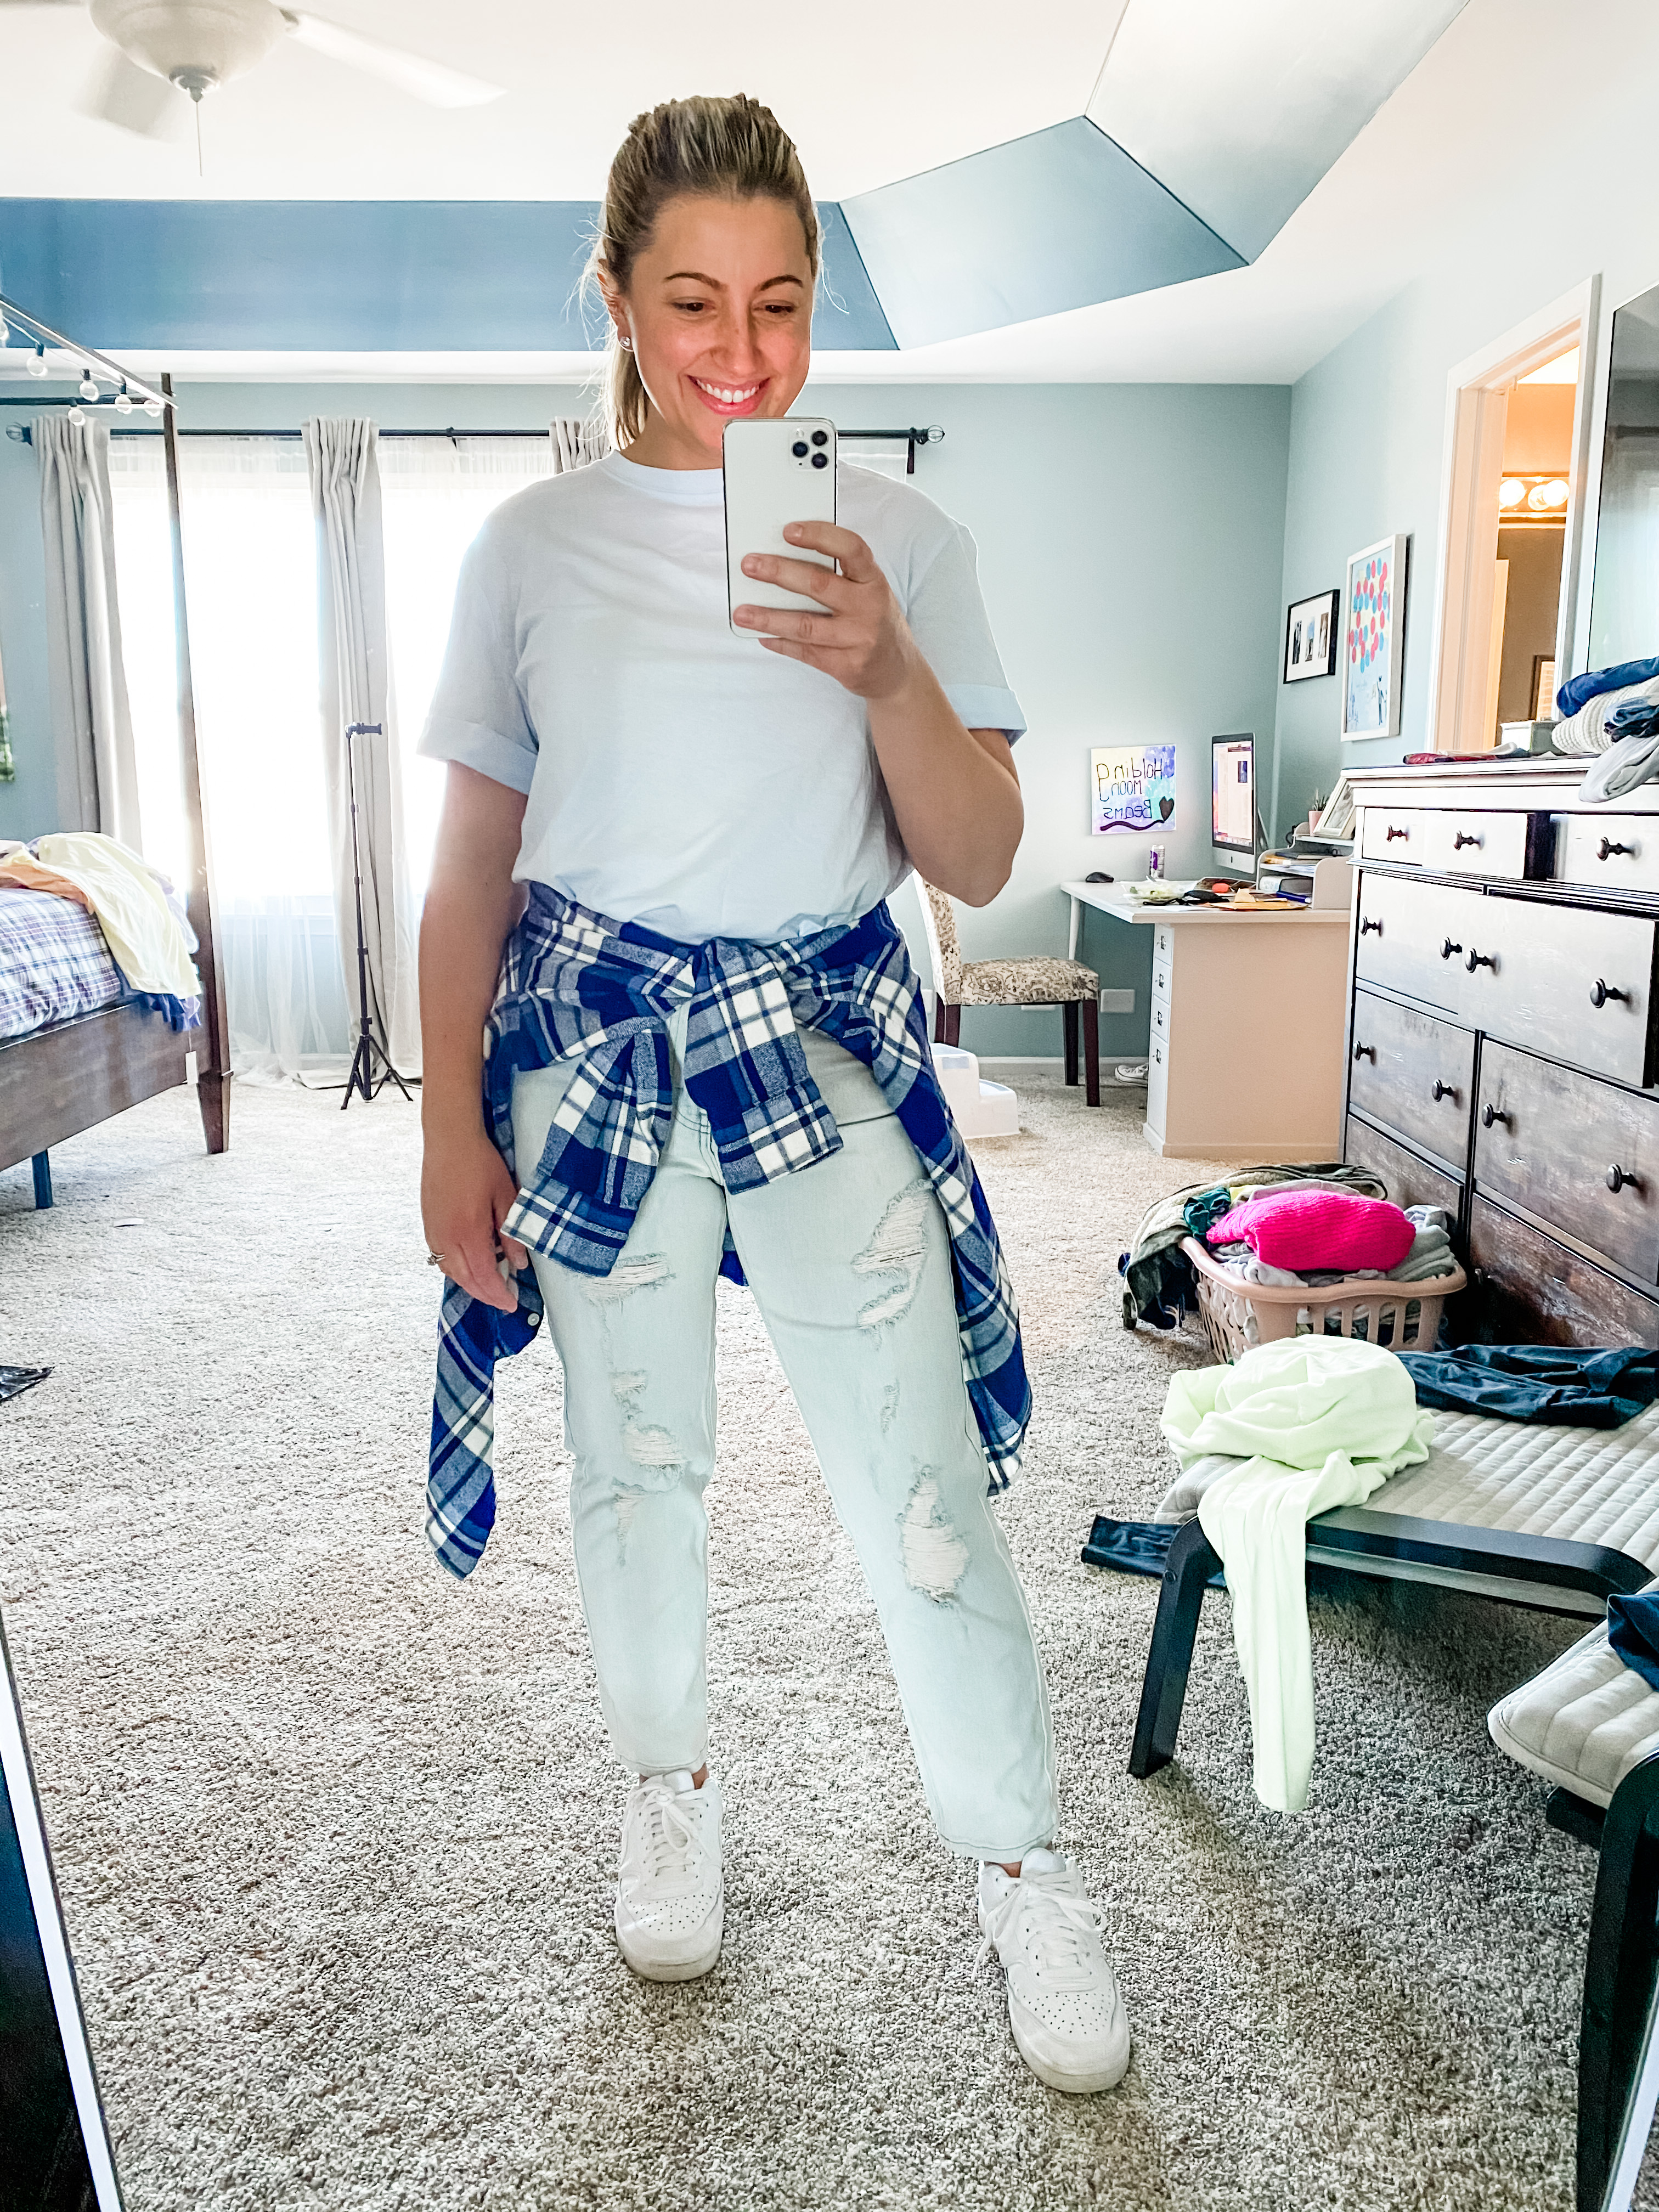 A young female in her 30s is standing in her bedroom with a messy background of furniture and clothes. She is wearing a light blue short sleeve shirt. The sleeves have cuffs. She has a blue and white checkered plaid flannel wrapped around her waist. She is wearing a light blue distressed mom jeans from target. And her favorite white sneakers. One hand is holding the phone in the other is down by her side. She is smiling at the phone. PhoneIf you click on the picture, it takes you to a link where you can shop the items in the photo.